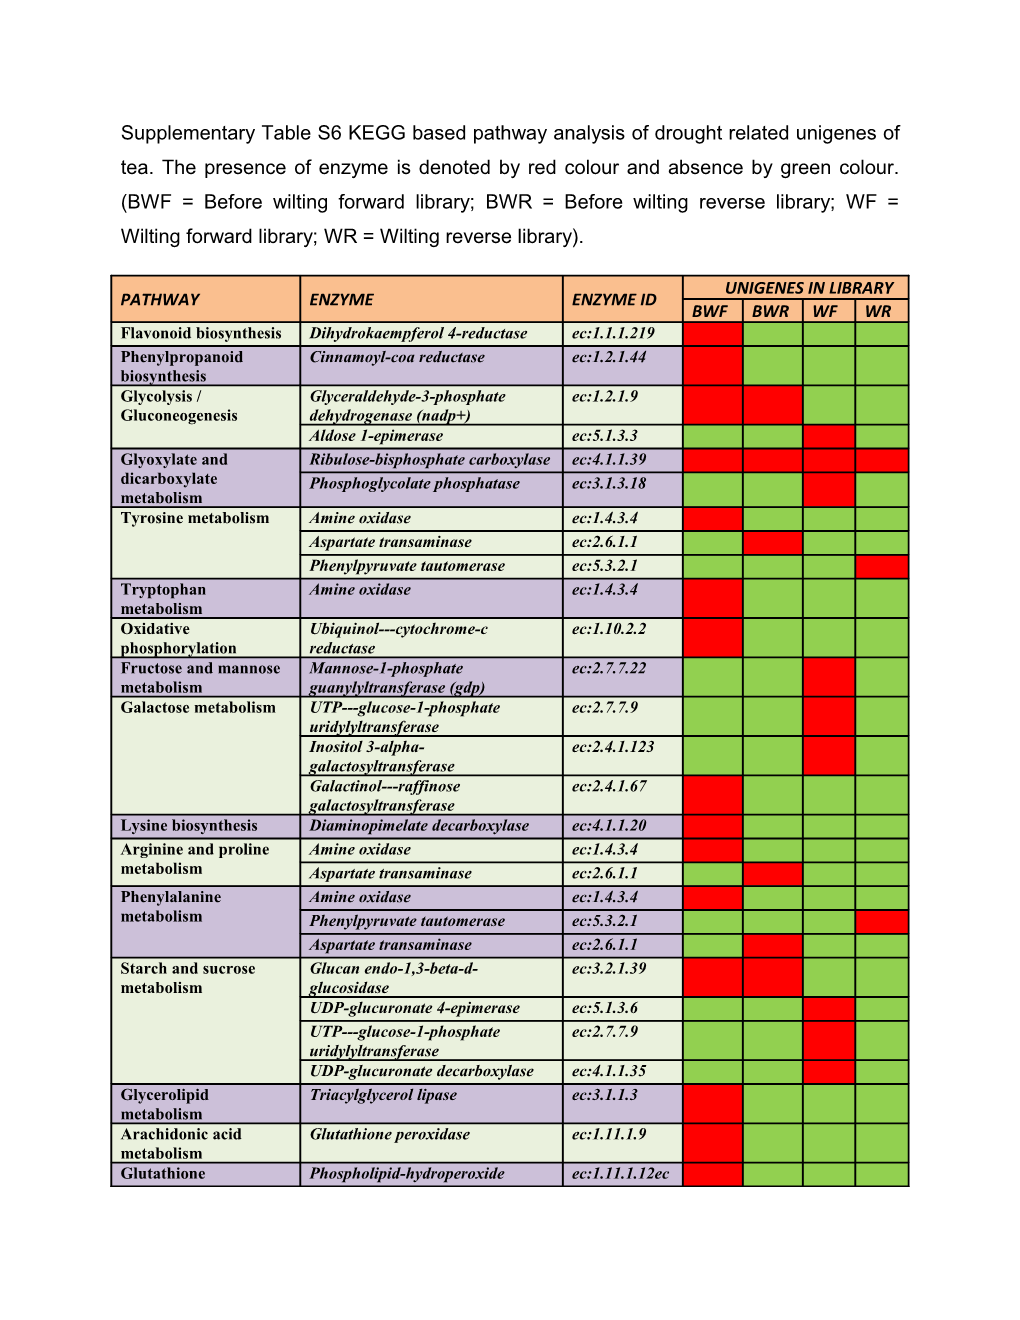 Supplementary Table S6 KEGG Based Pathway Analysis of Drought Related Unigenes of Tea